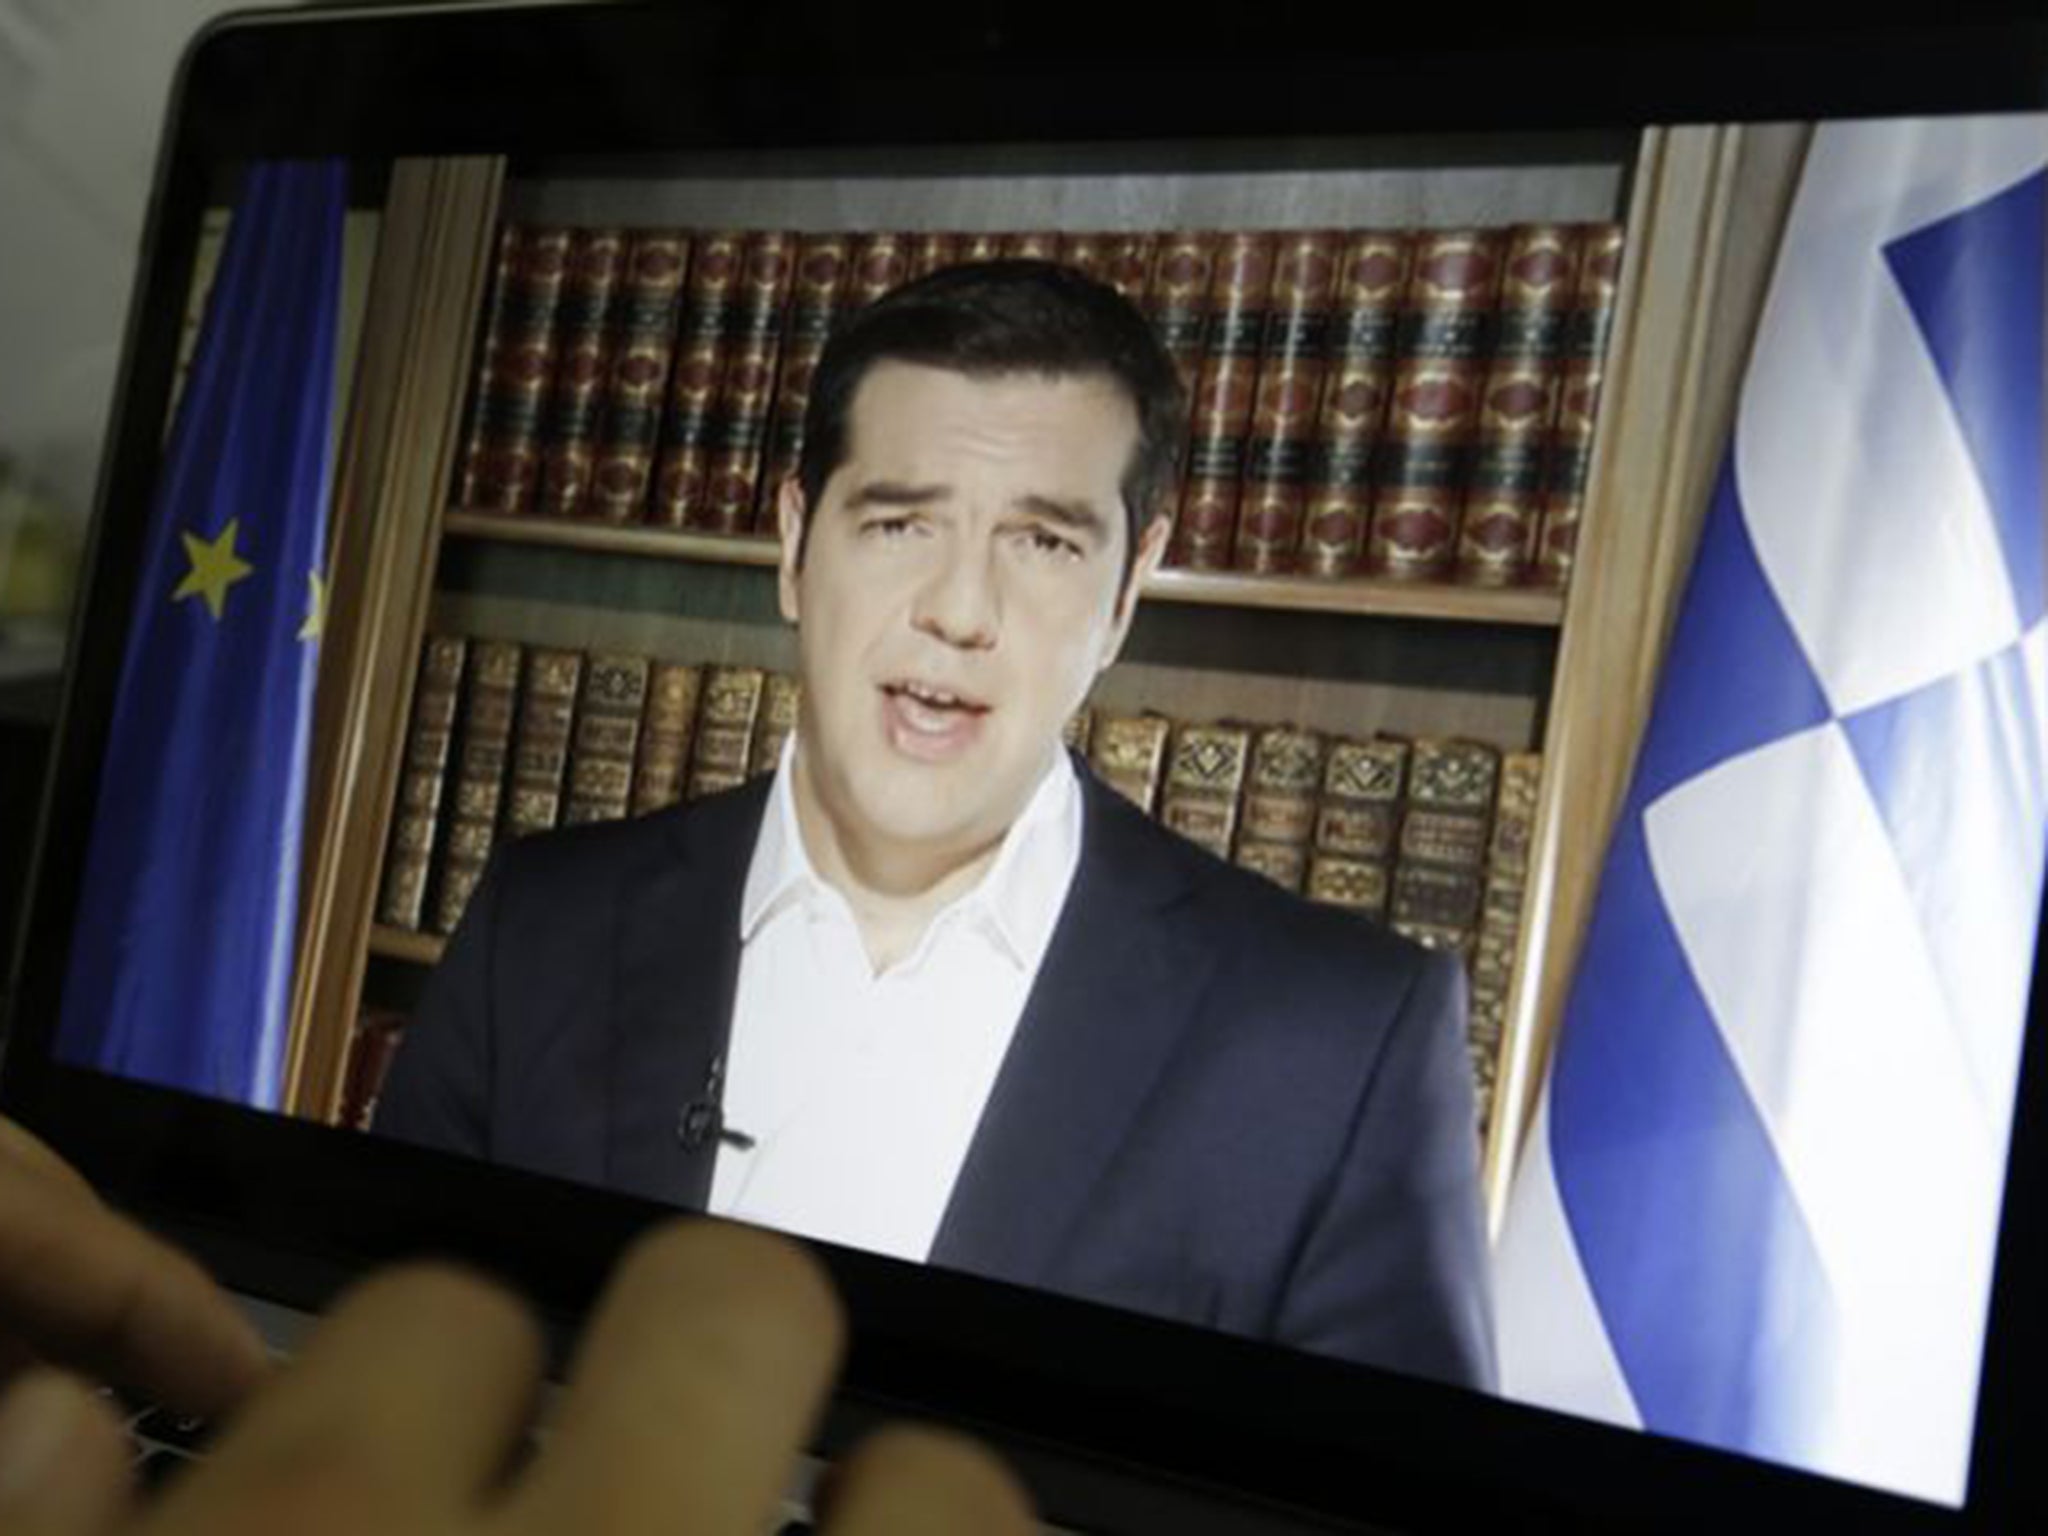 Greece’s Prime Minister Alexis Tsipras gave a televised address to the nation on Friday. He has called on voters to reject creditors’ proposals for more austerity in return for rescue loans